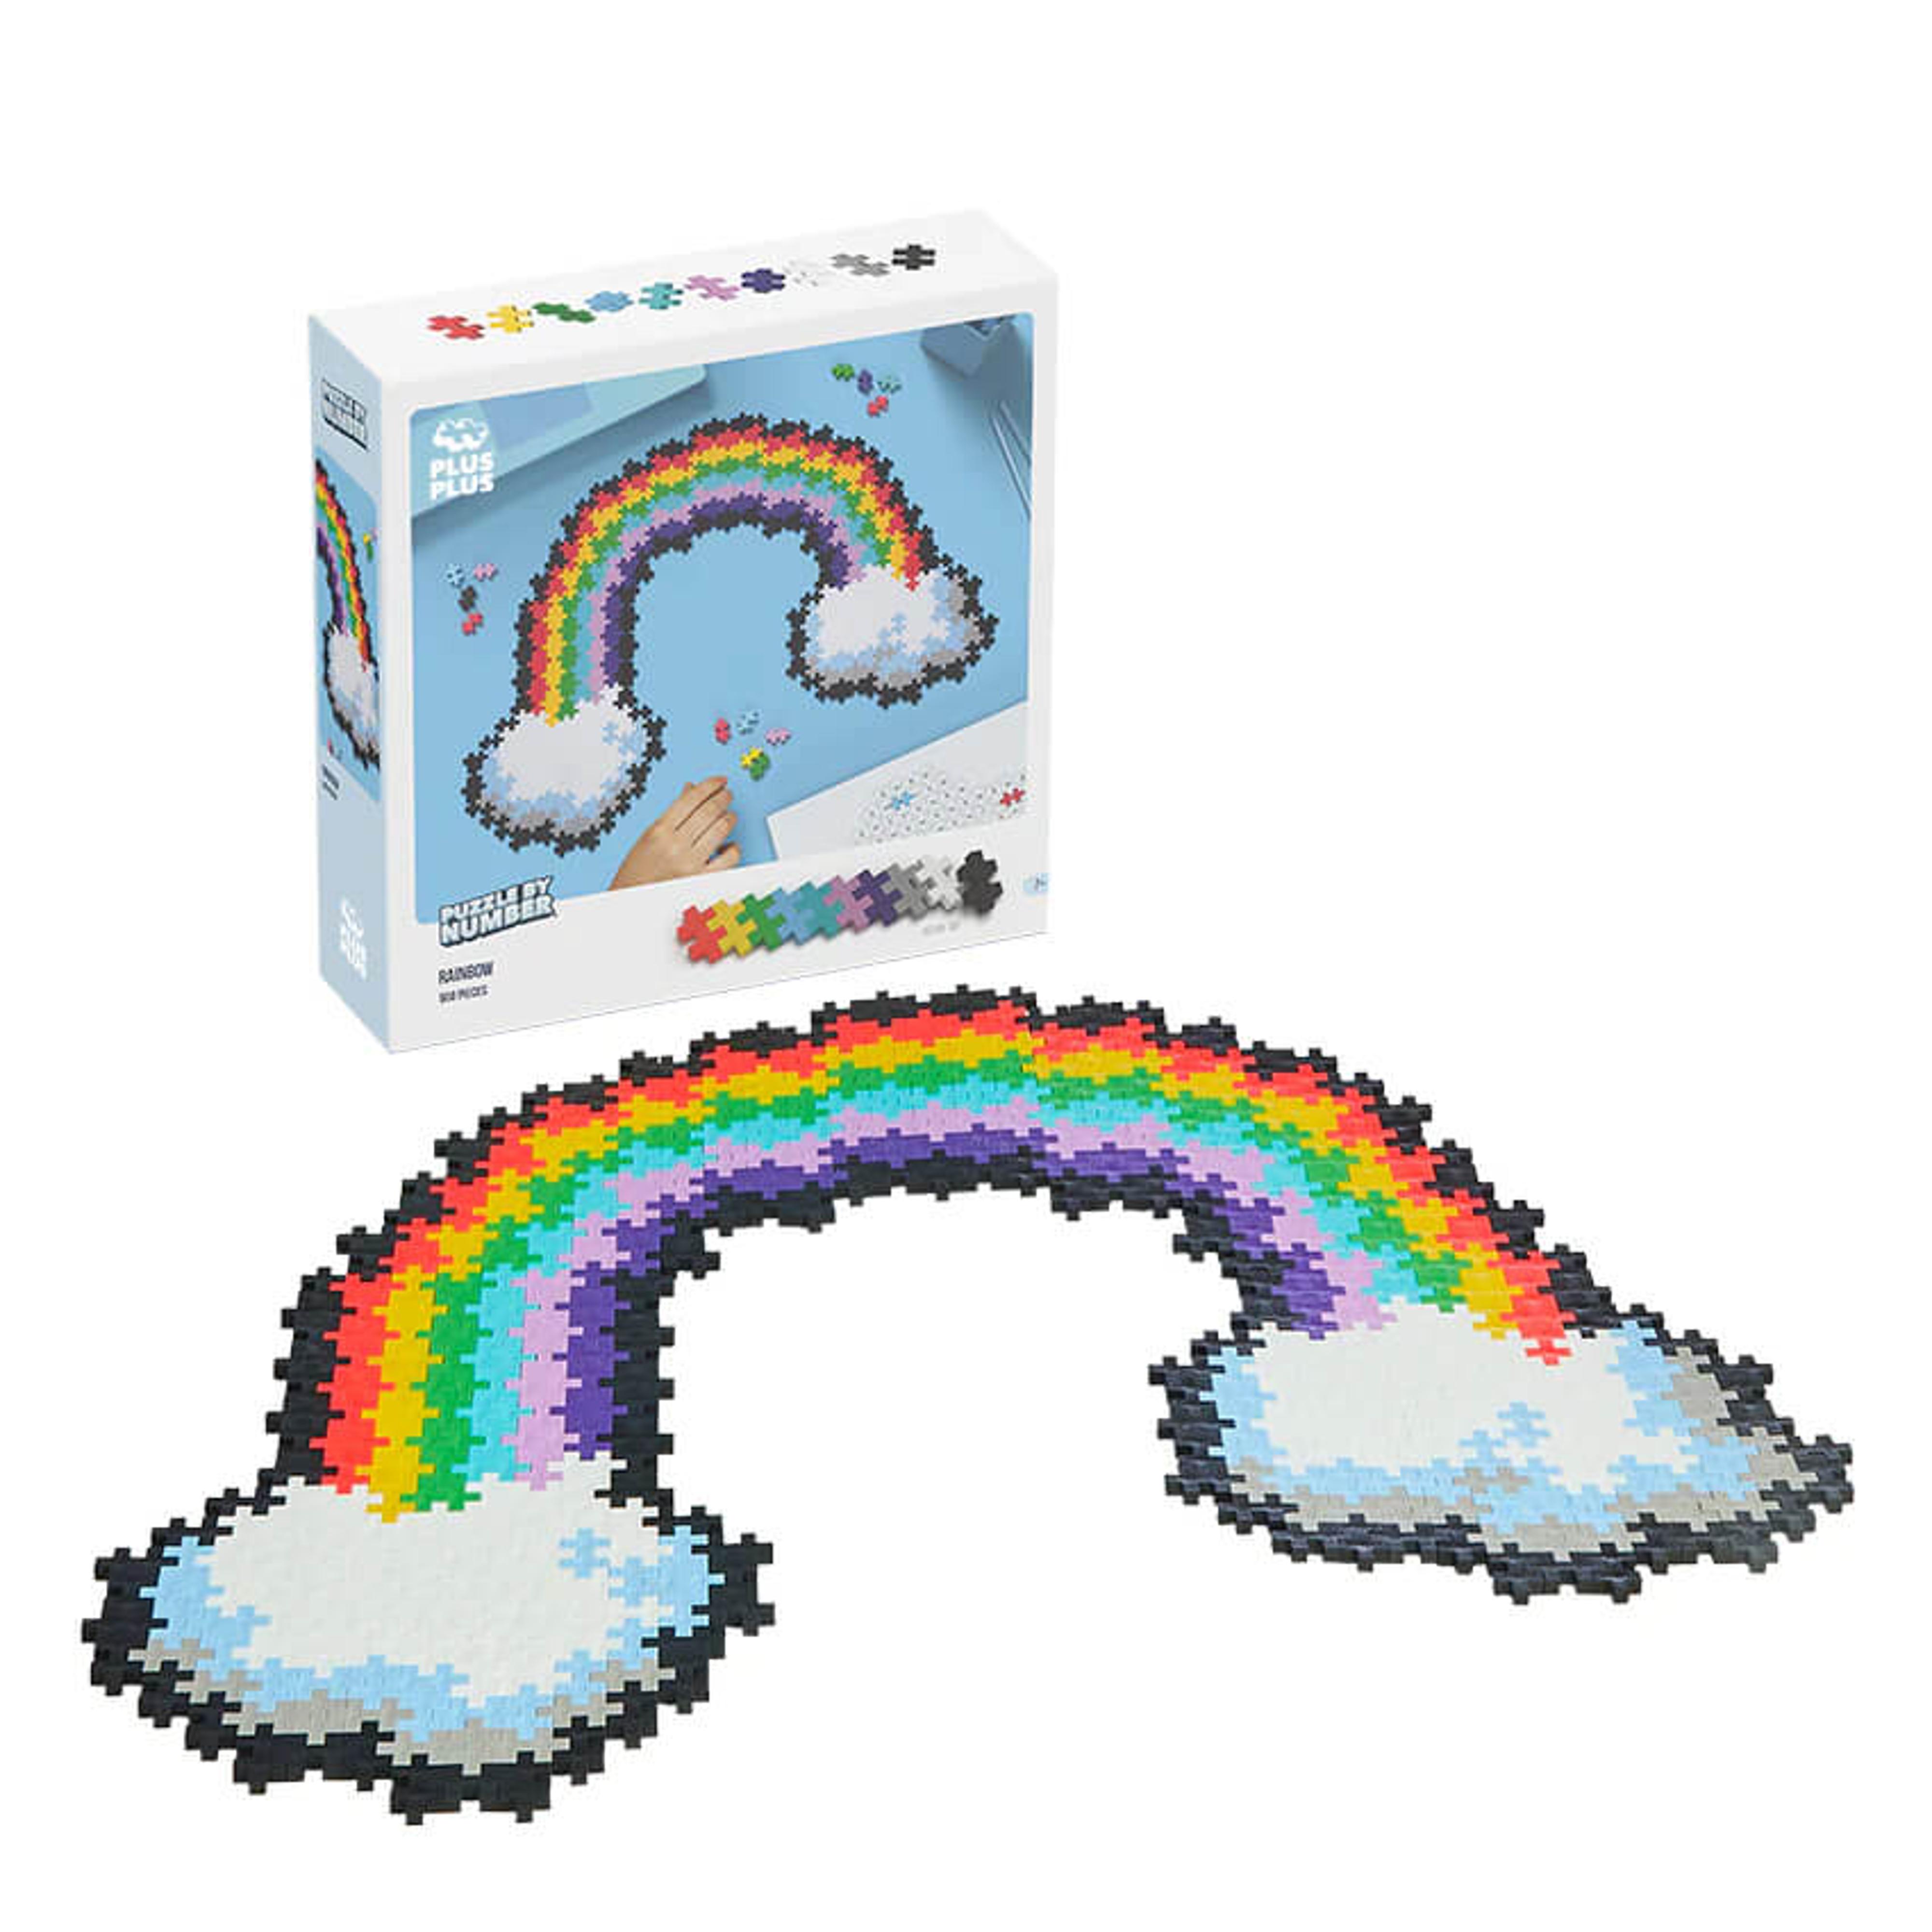 Puzzle by Number - Rainbow (500 pc)